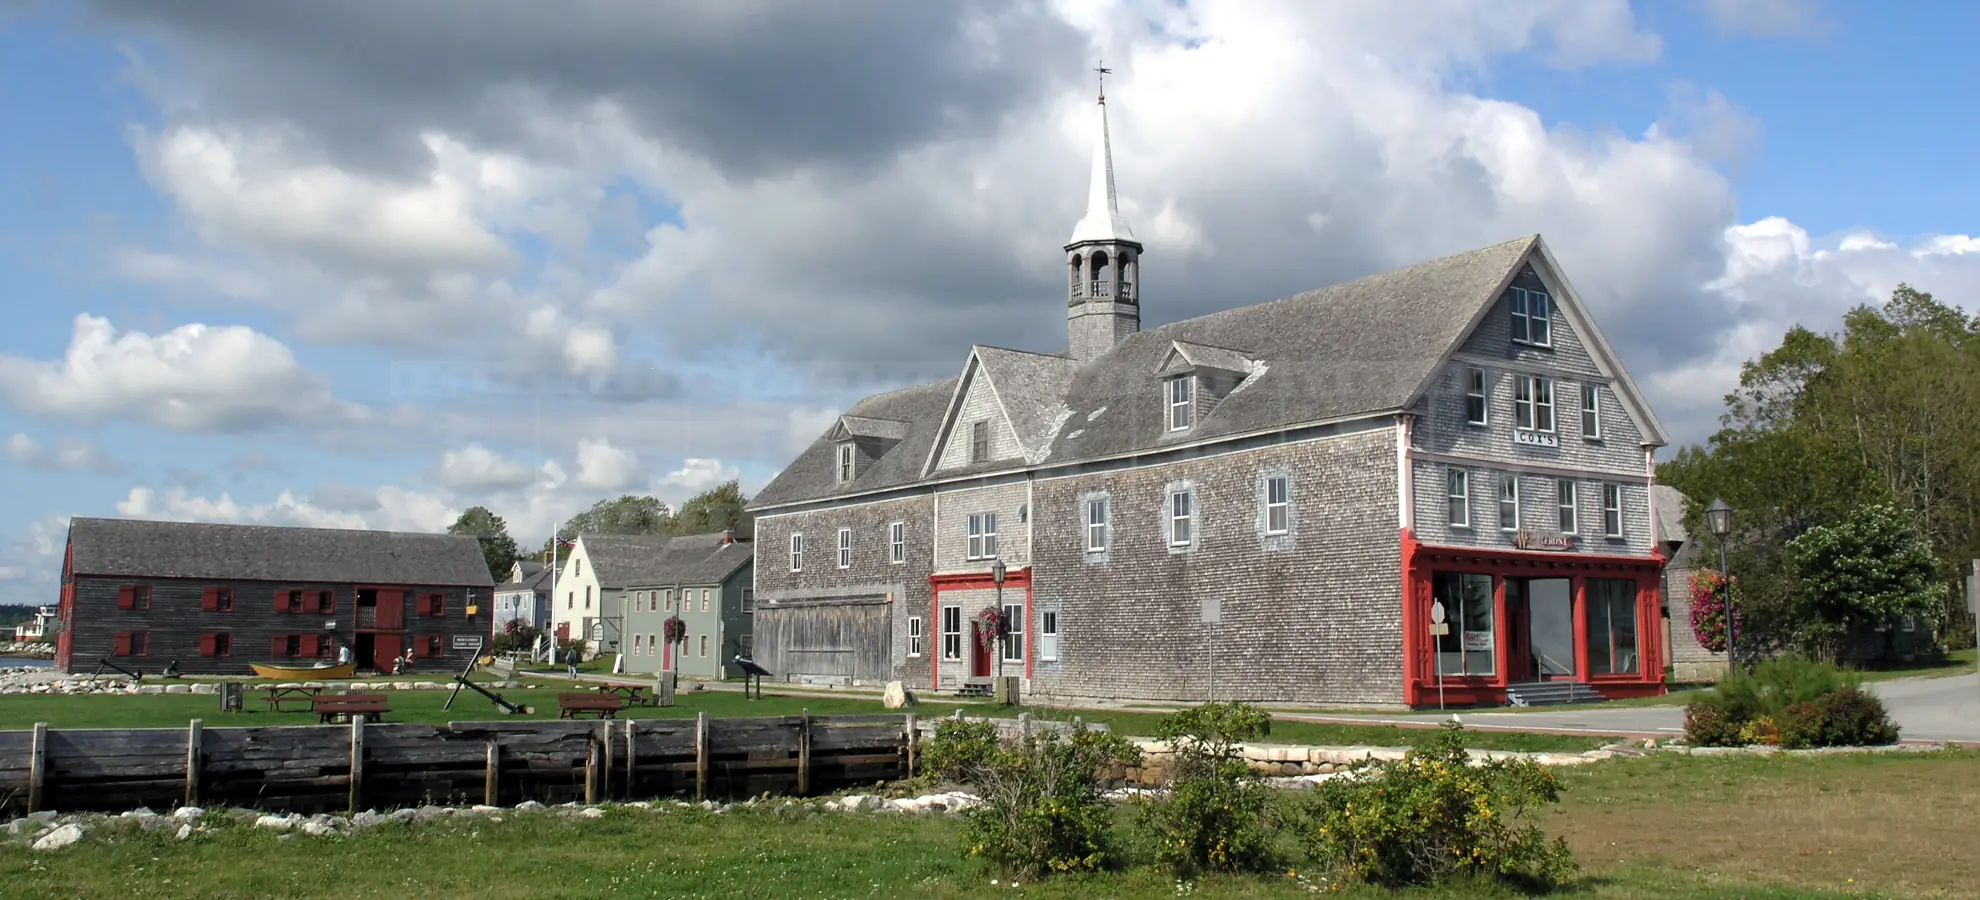 Old wooden buildings on waterfront in Shelburne, NS, Canada